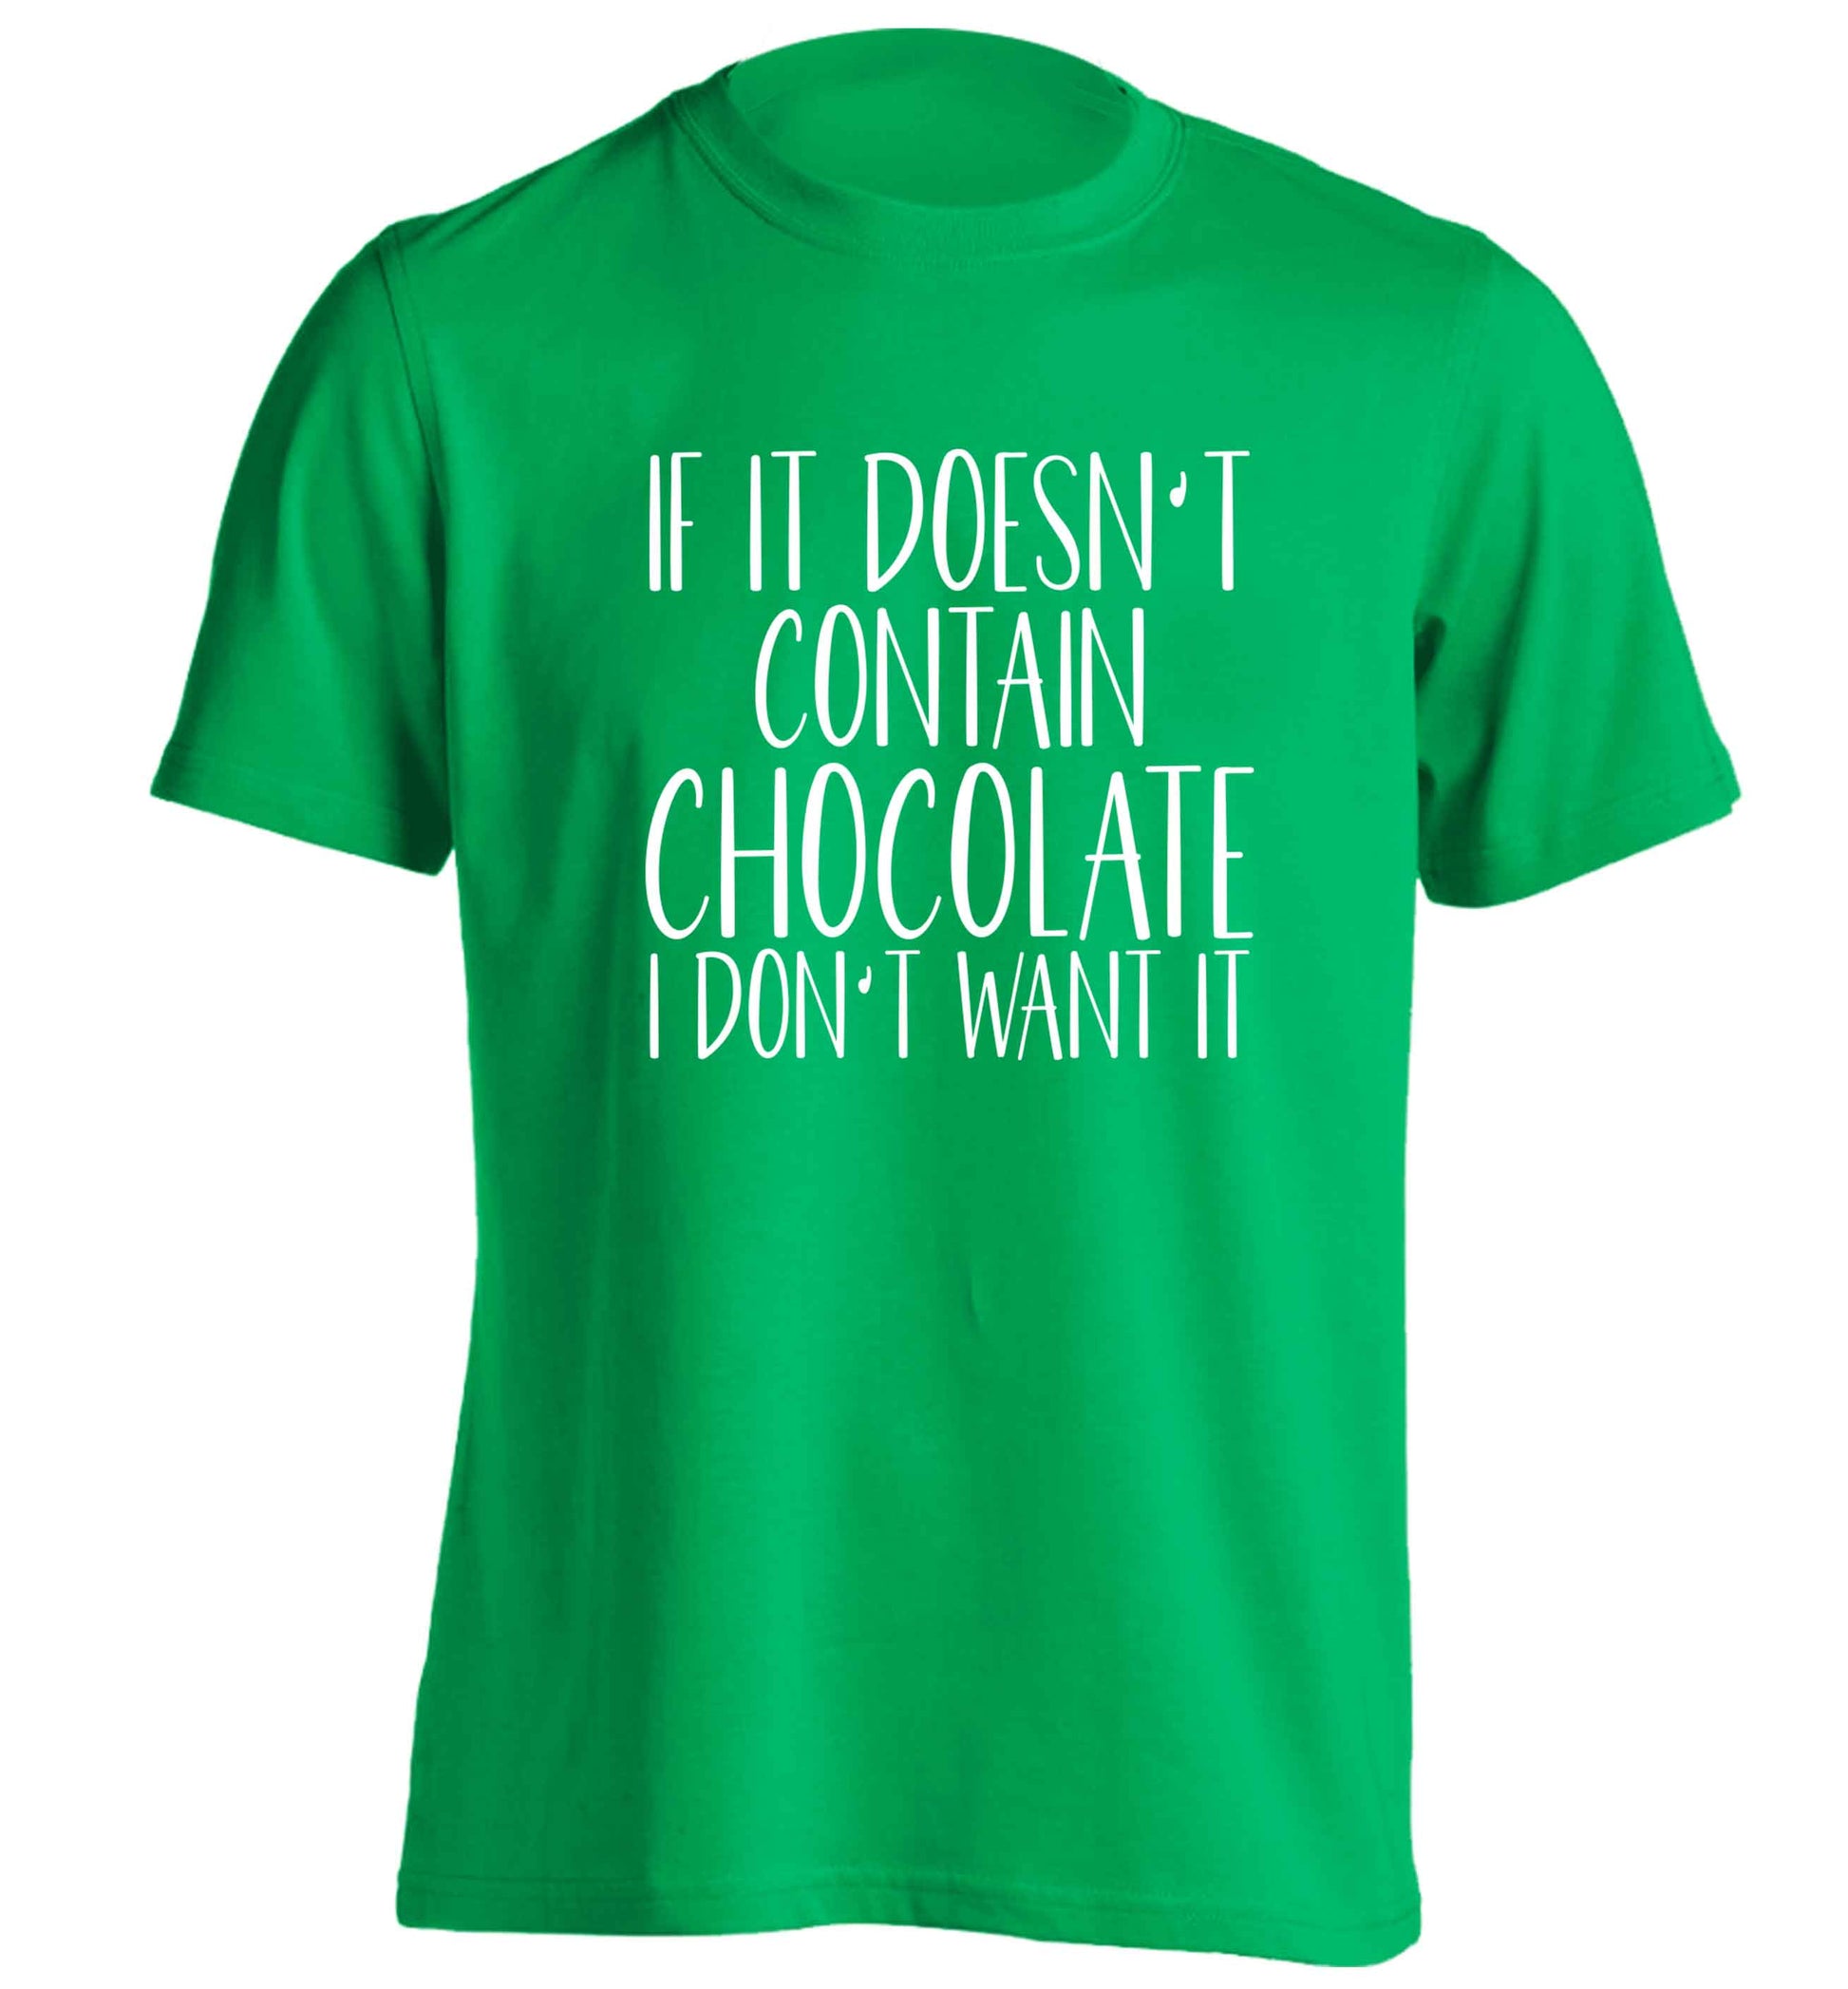 If it doesn't contain chocolate I don't want it adults unisex green Tshirt 2XL